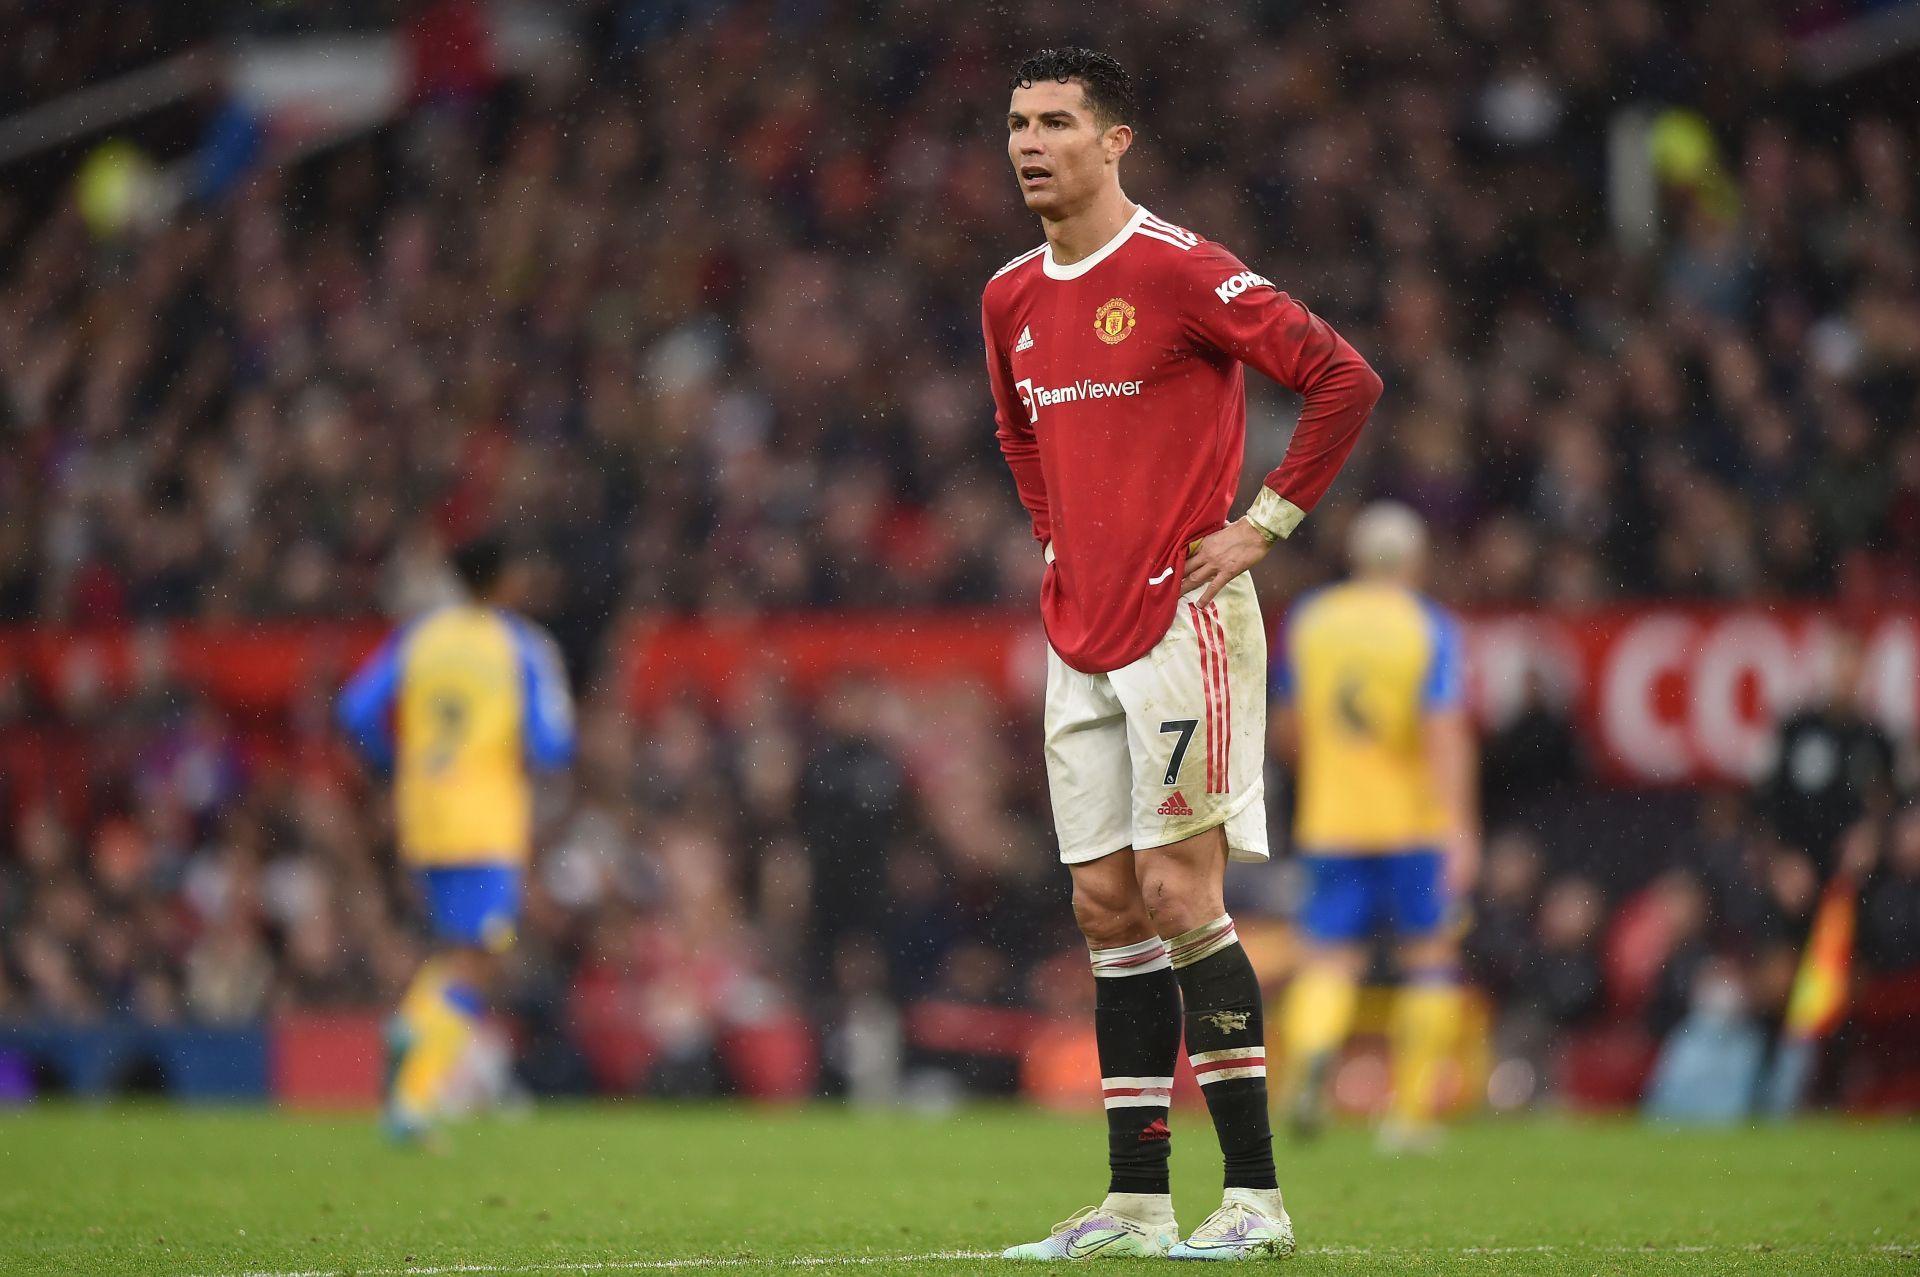 Will the Cristiano Ronaldo be at Old Trafford next term?